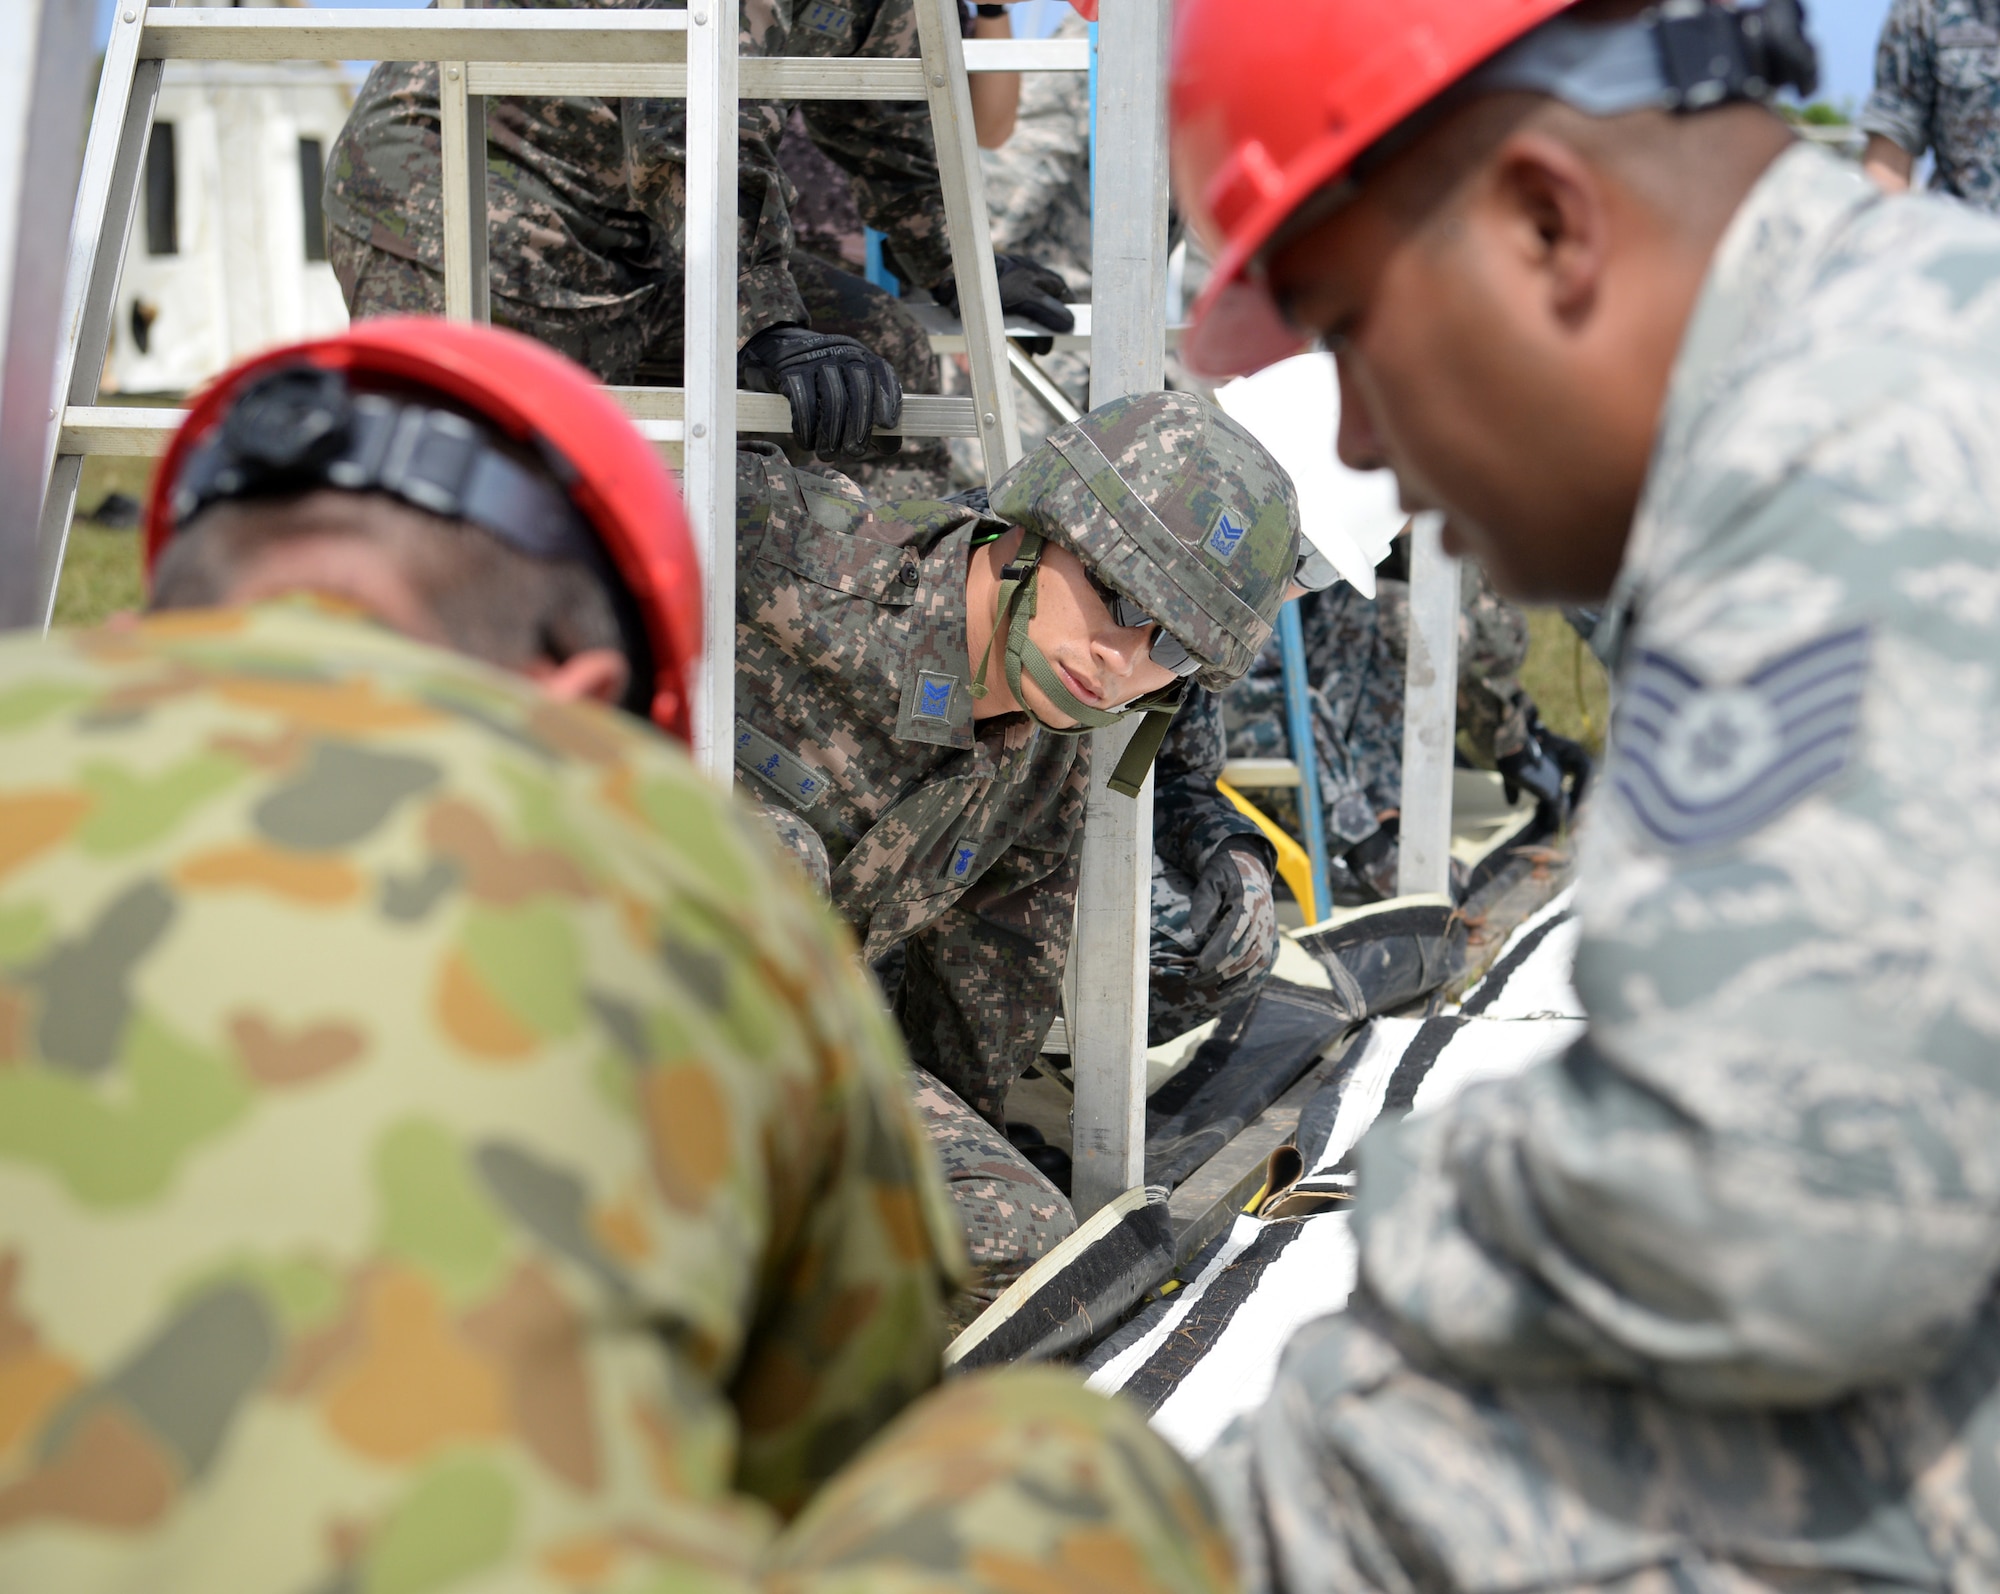 Republic of Korea Air Force Master Sgt. Yong Hwan Han, a barrier maintenance supervisor, secures contour ropes to a base frame for a small shelter system setup during Partner Nation Silver Flag, Feb. 13, 2016, at Andersen Air Force Base, Guam. The exercise is a small part of the first multilateral Silver Flag Exercise, a U.S. Pacific Command multilateral Theater Security Cooperation Program subject matter expert exchange event designed to build partnerships and promote interoperability through the equitable exchange of civil engineer related information. (U.S. Air Force photo by Senior Airman Joshua Smoot/Released)